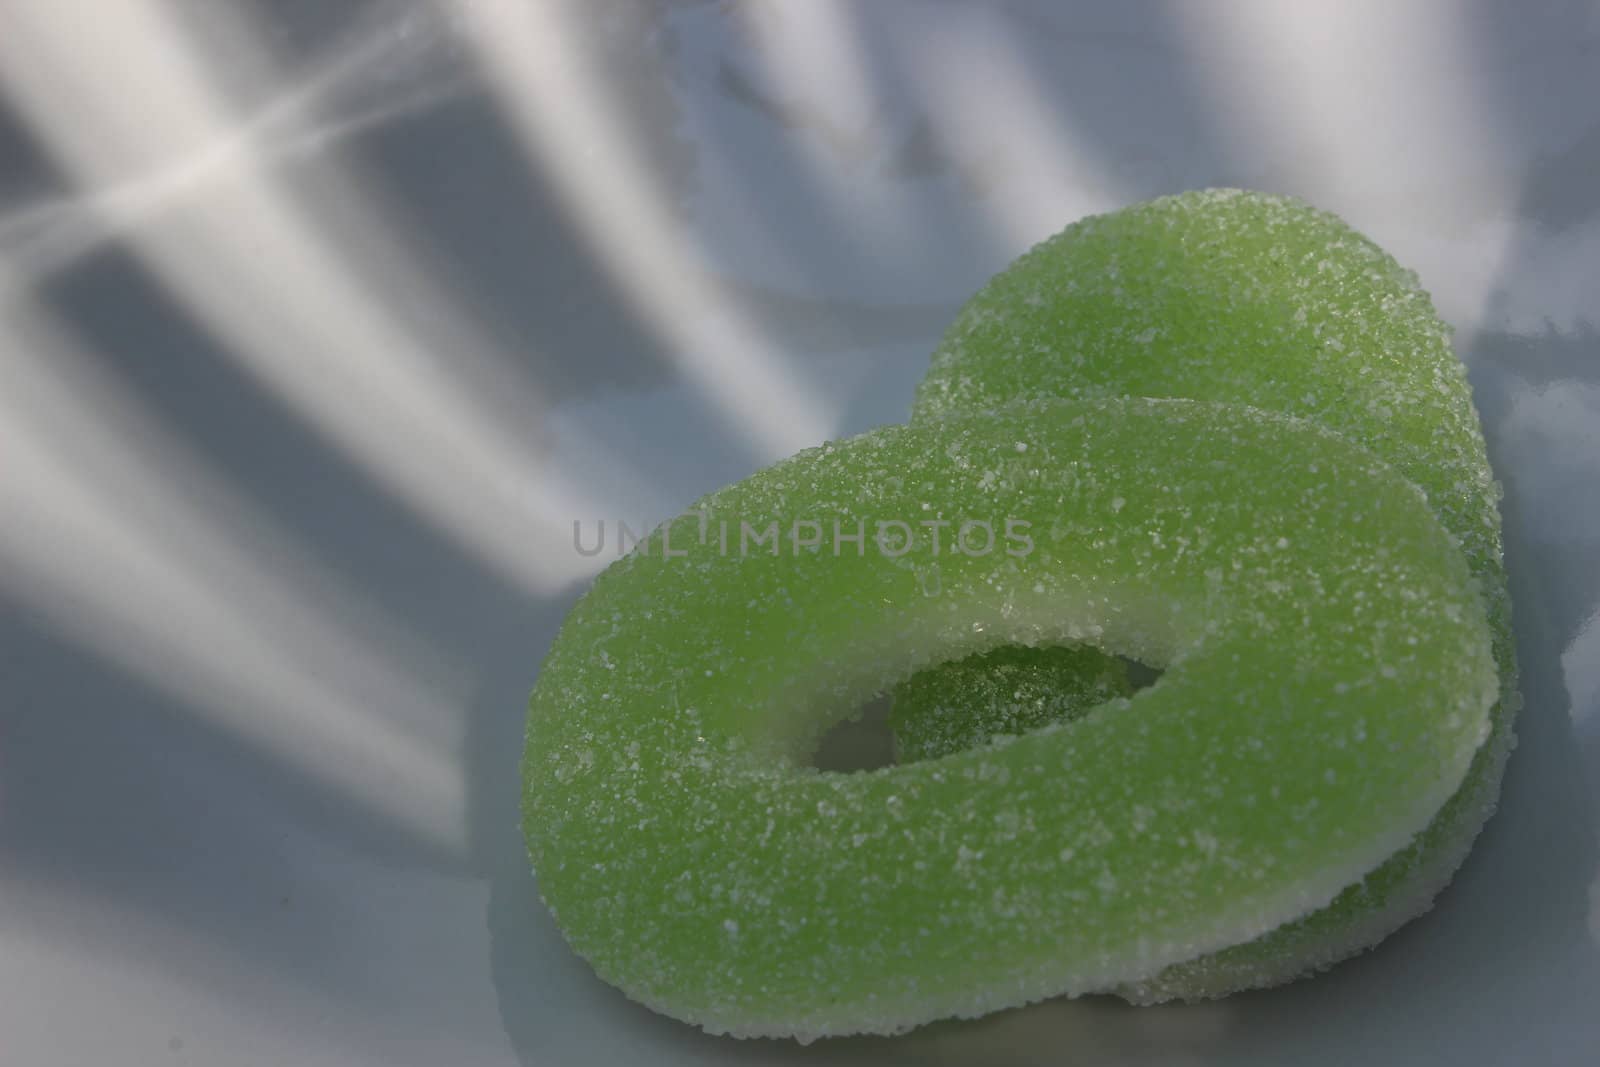 fine image of sugar sweets on white background